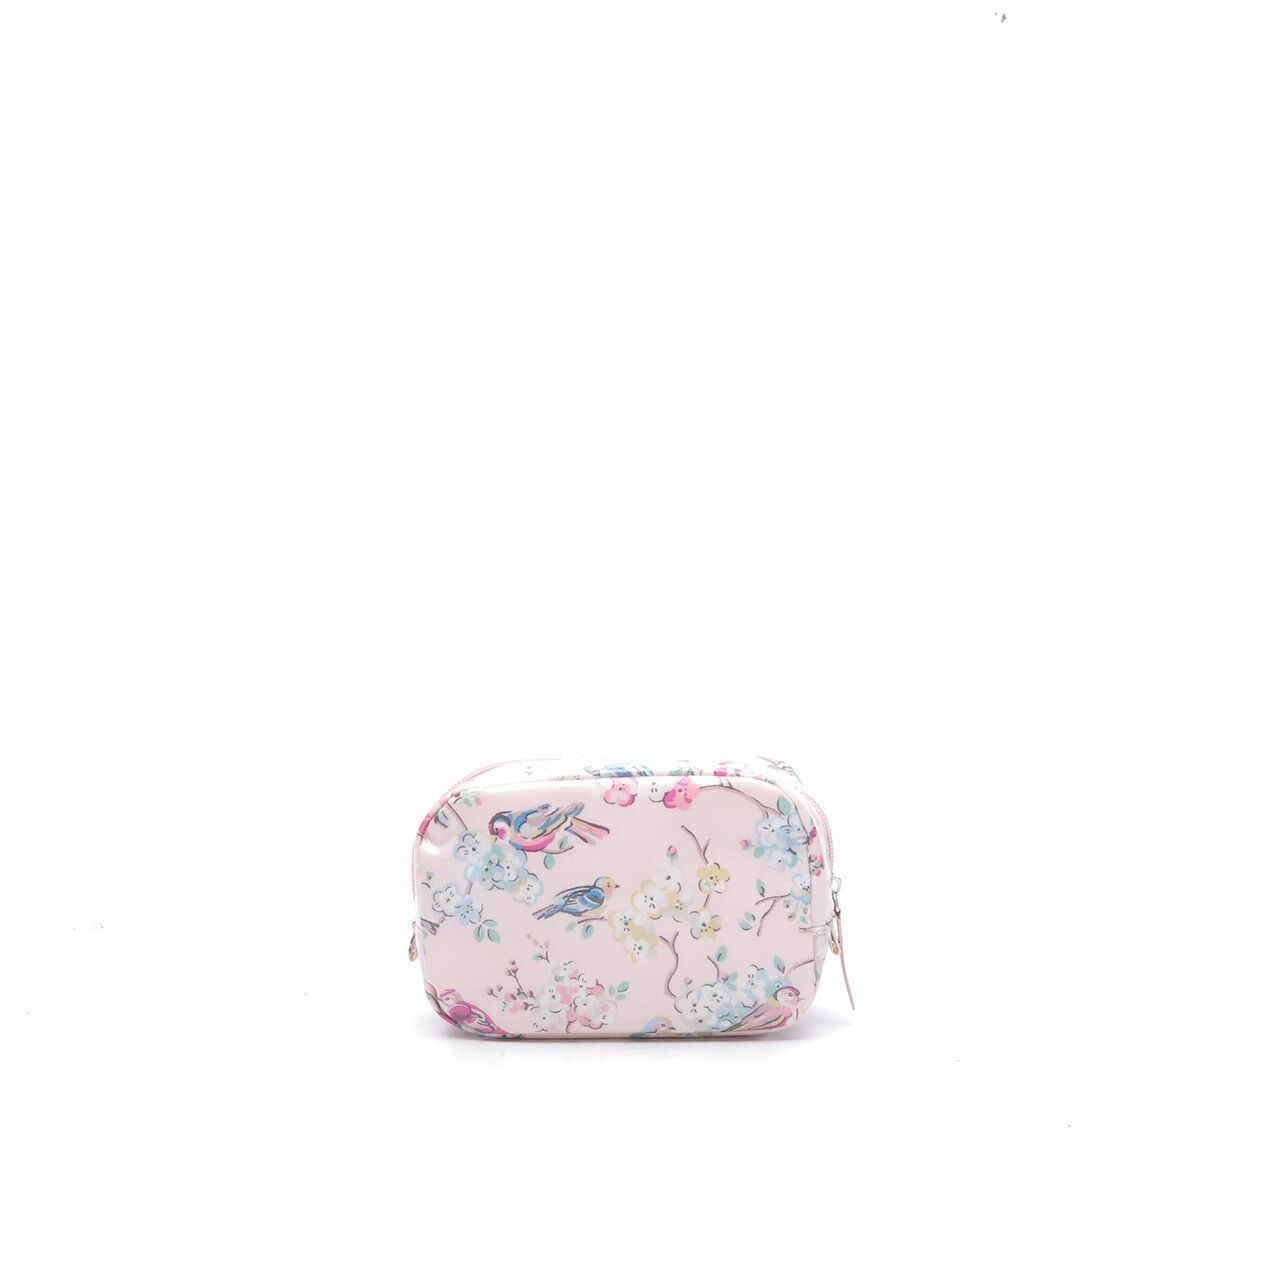 Cath Kidston Pink Pouch